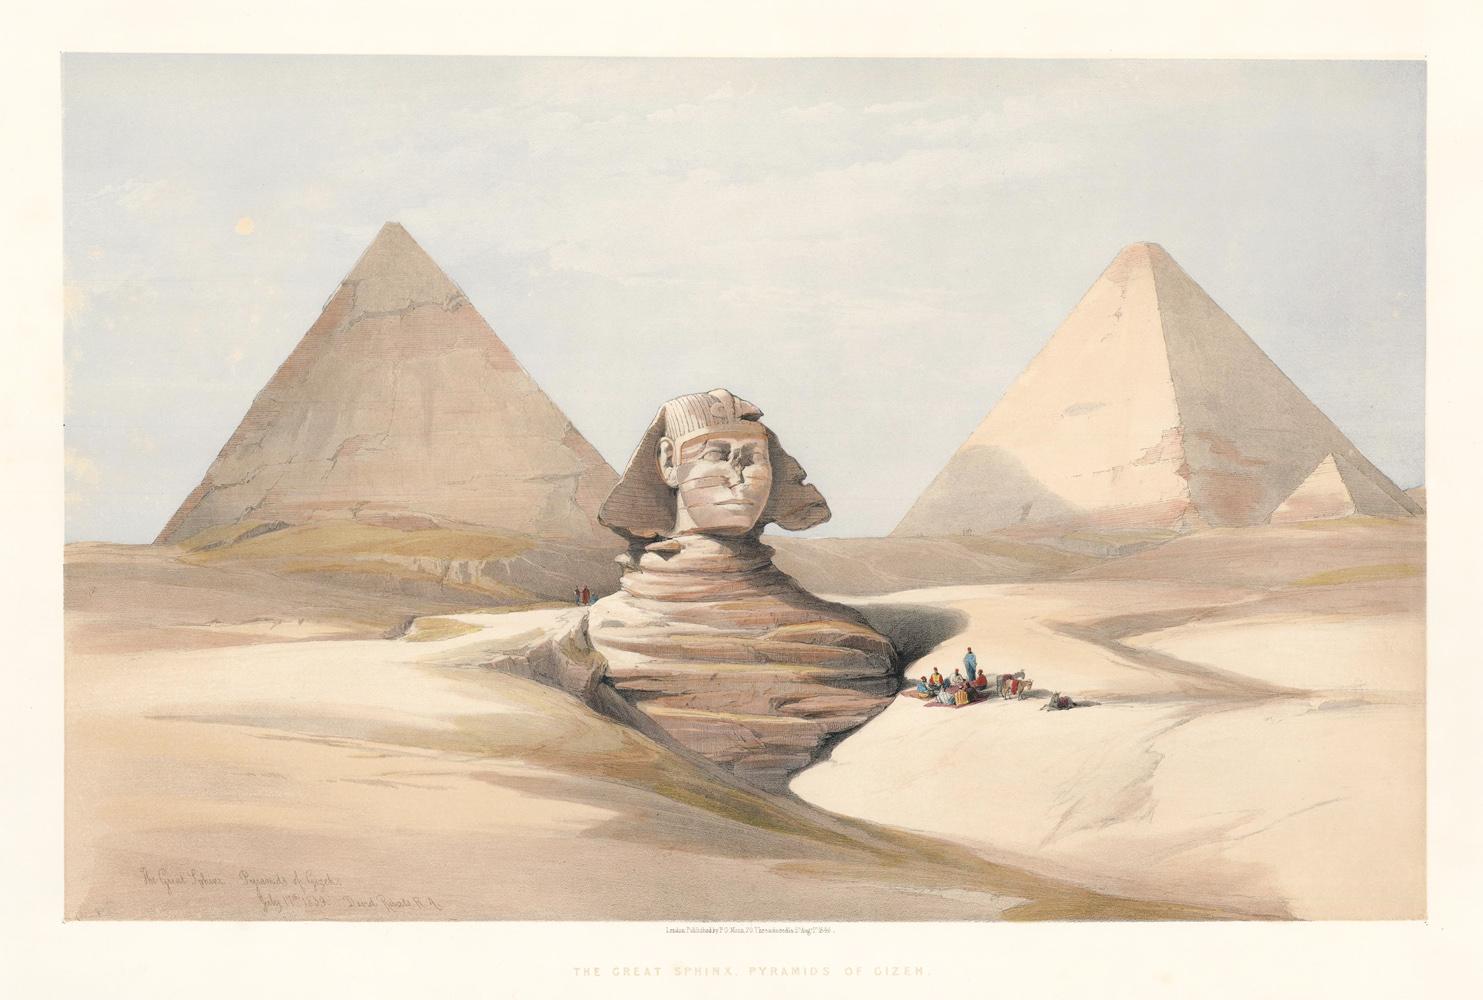 David Roberts Landscape Print - The Great Sphinx. Pyramids at Gizeh.